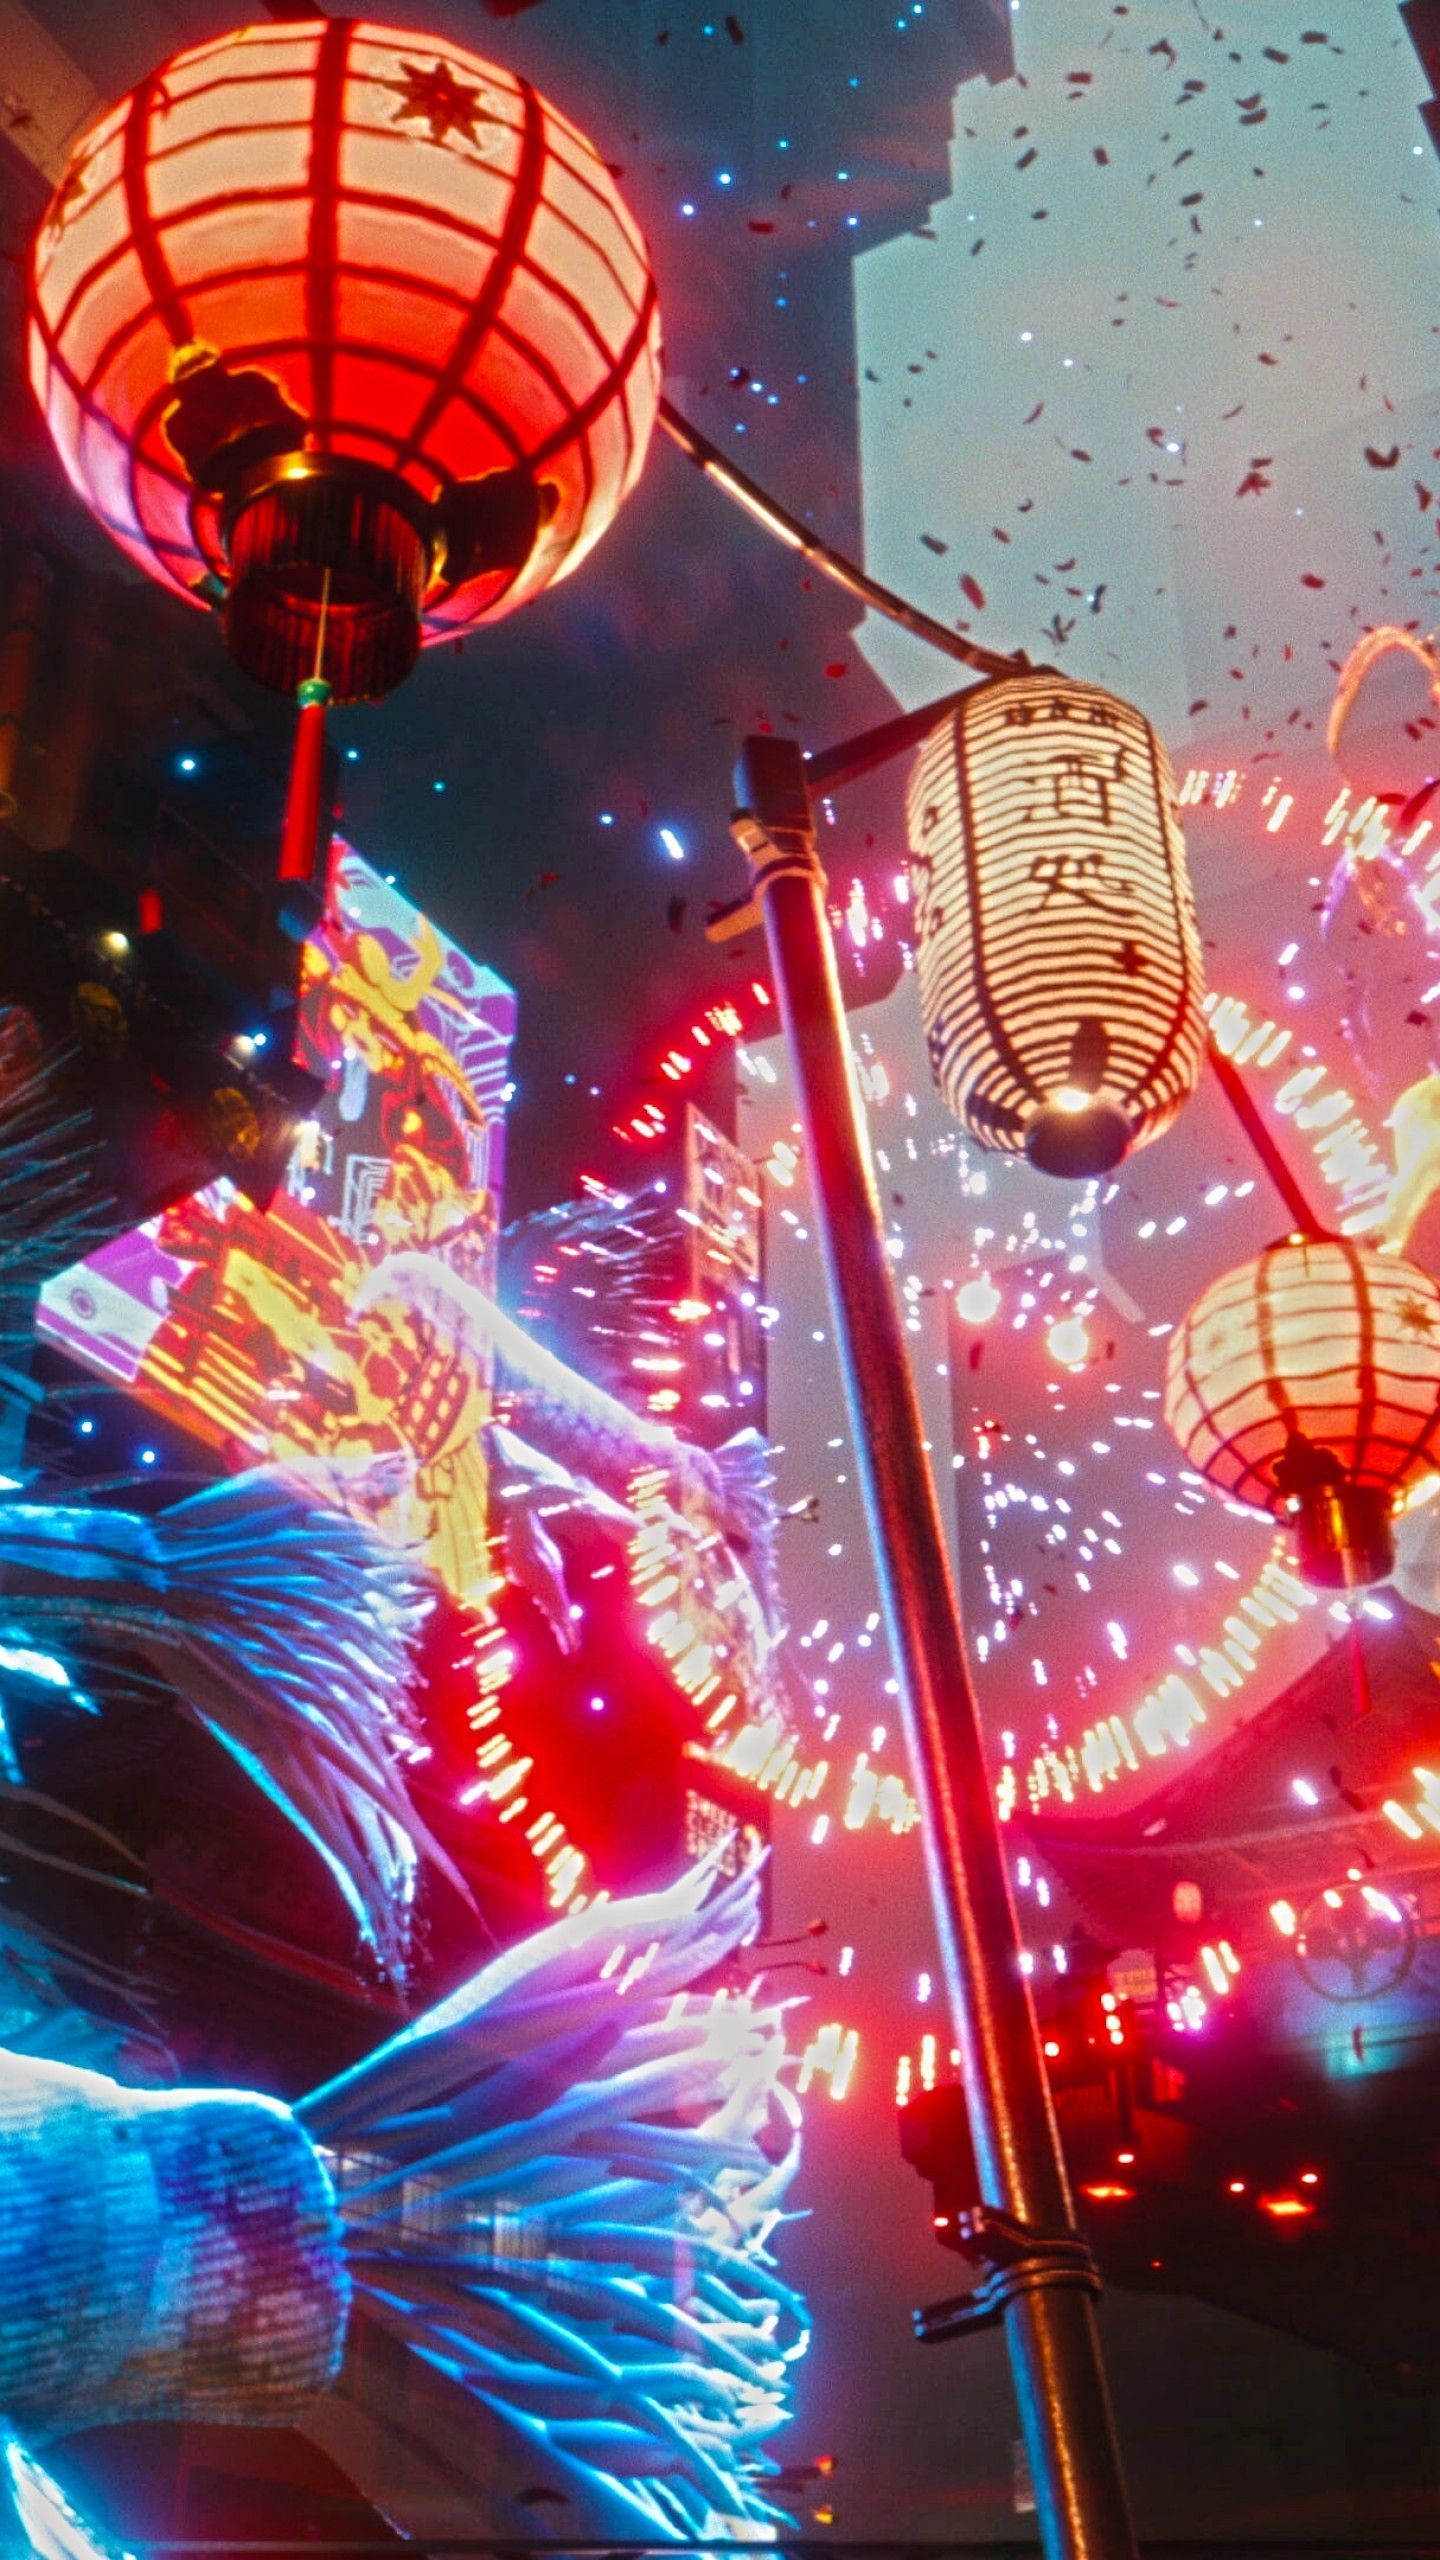 A street lamp with red lanterns hanging from it. - Cyberpunk 2077